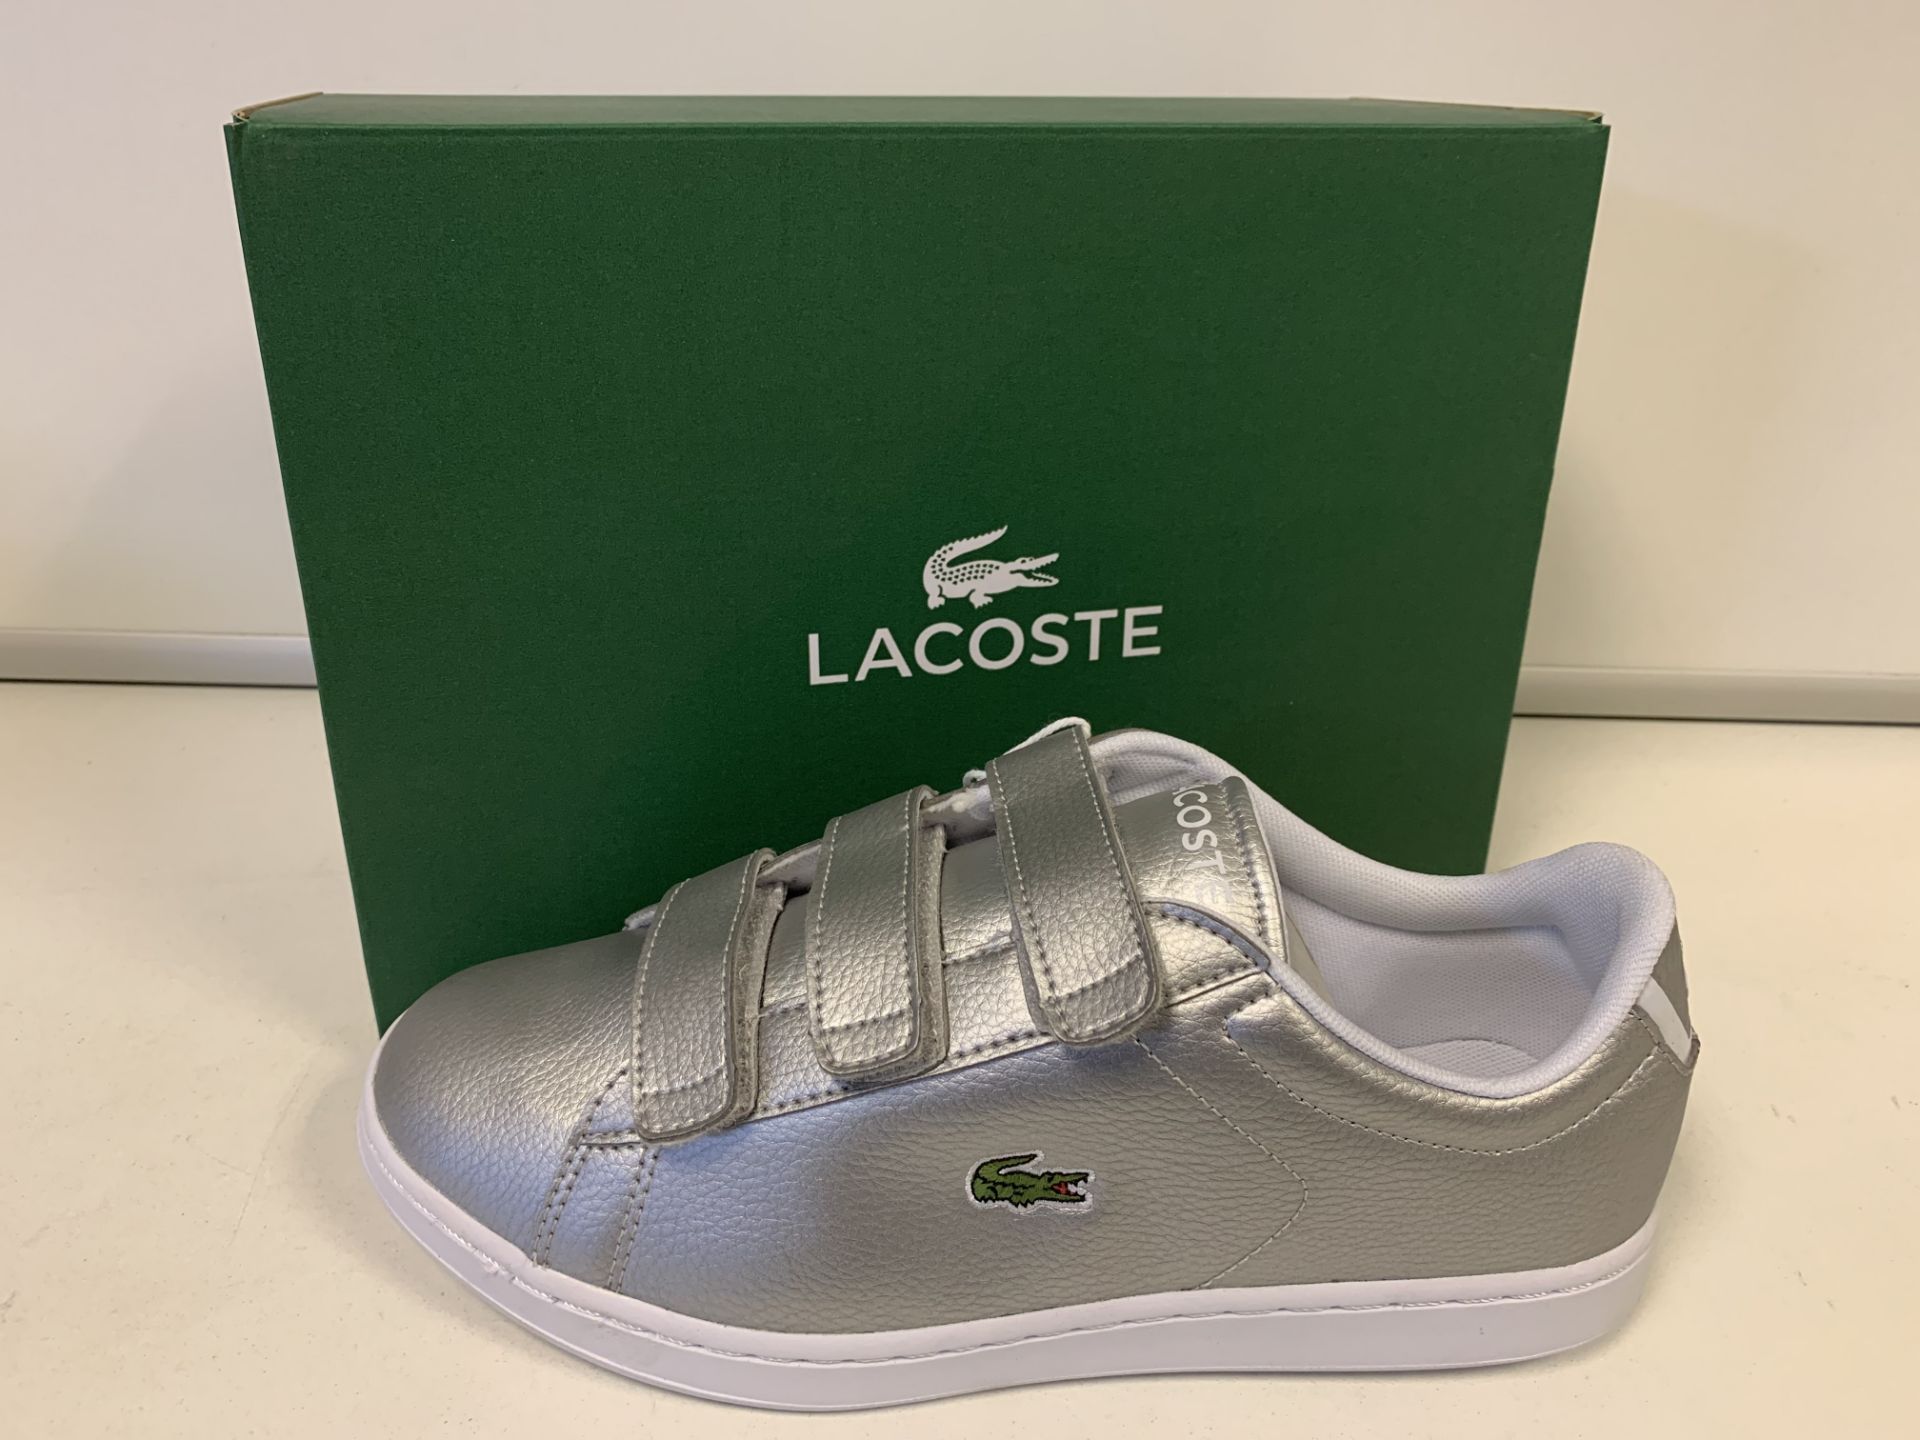 (NO VAT) 2 x NEW BOXED PAIRS OF LACOSTE CARNABY EVO TRAP TRAINERS. SIZE UK 5 (94/16)